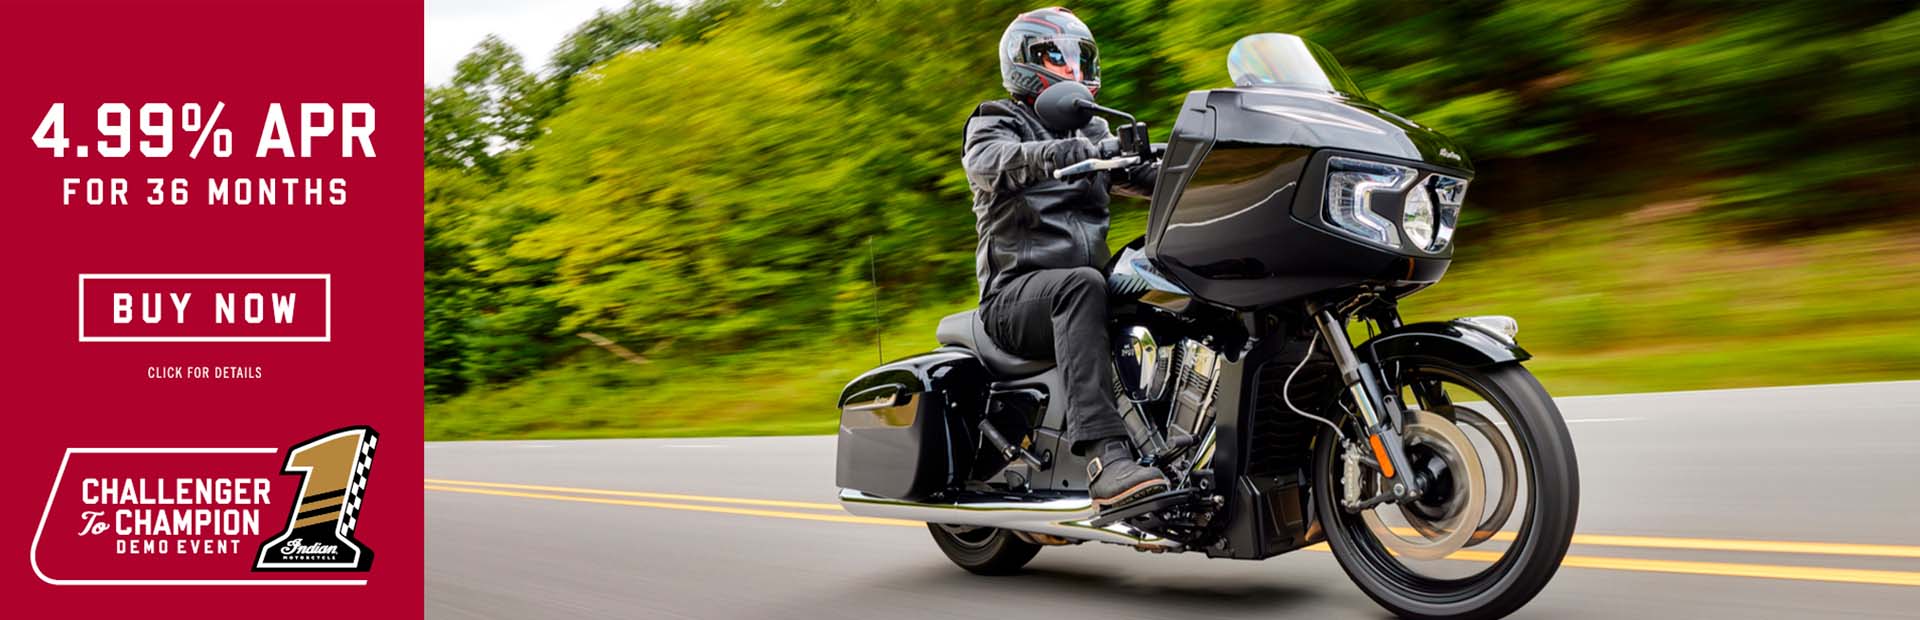 INDIAN MOTORCYCLES US - Financing Offer  US: 4.99% at Got Gear Motorsports